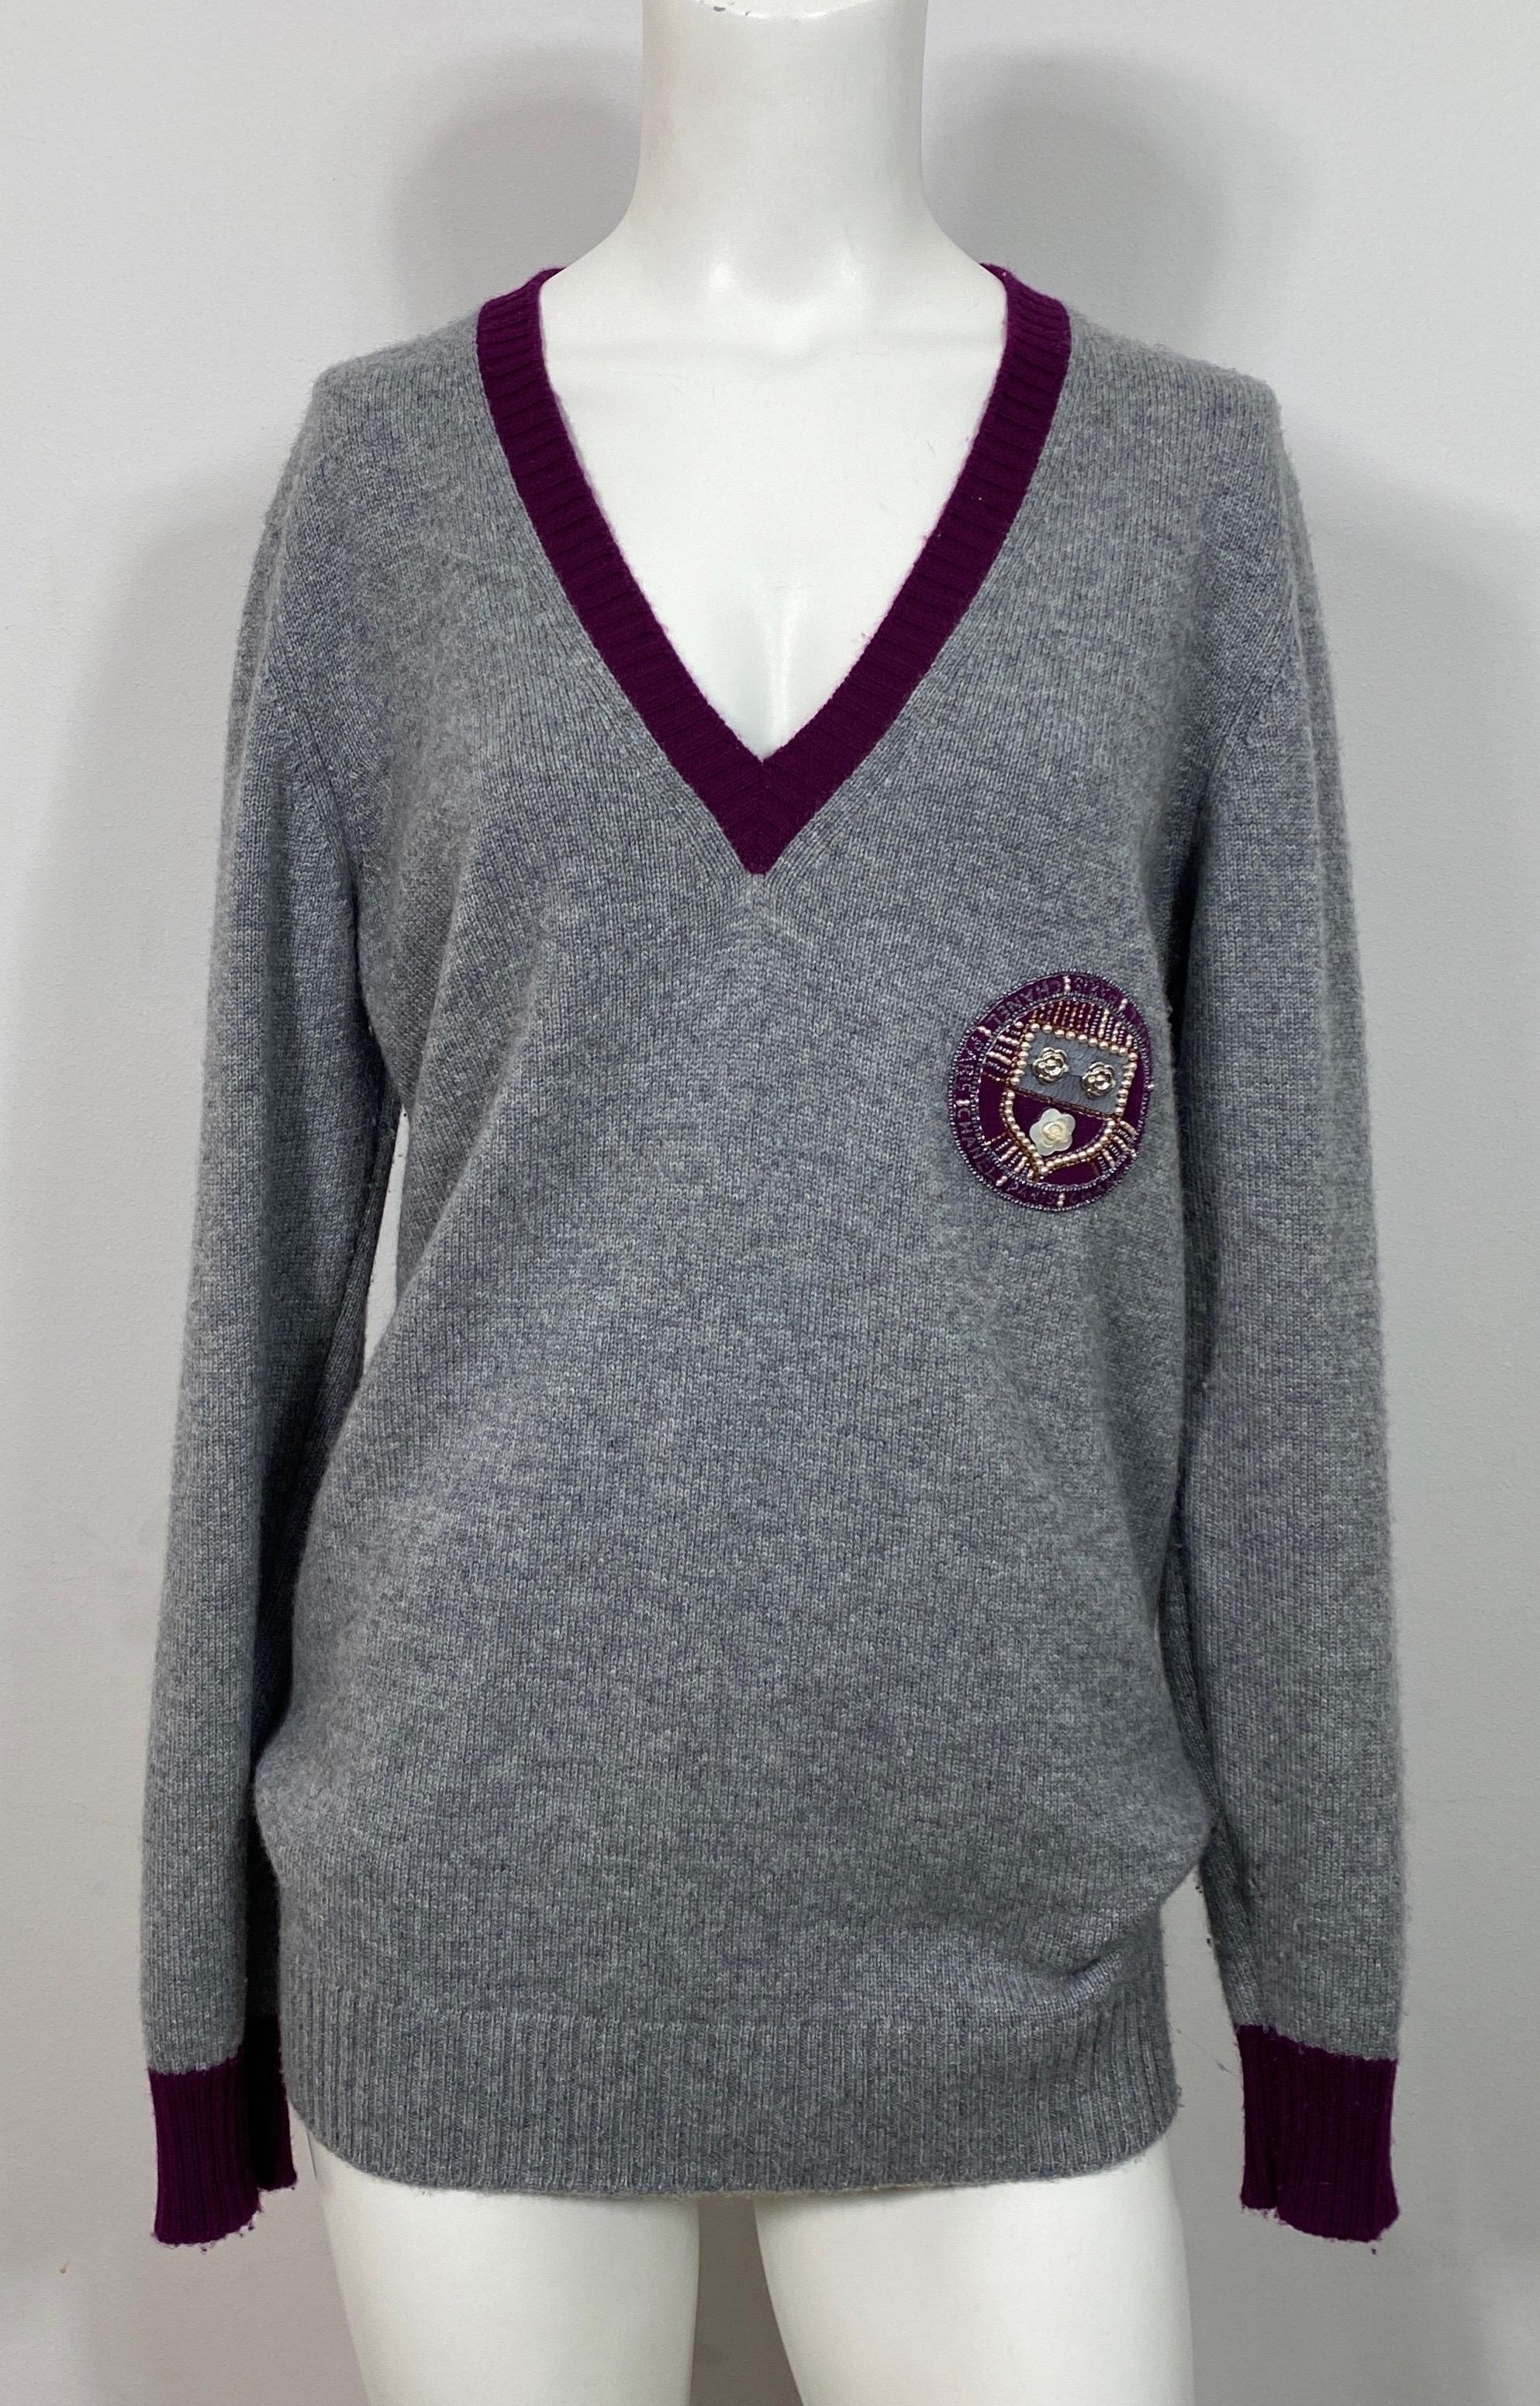 Chanel 2007A Grey and Purple Cashmere Crested V Neck Sweater This vintage 2007A Sweater is labeled a French 46, however if worn as a longer semi oversized piece then it would fit a Medium/Large. Please see measurements for more detail. The Crest is